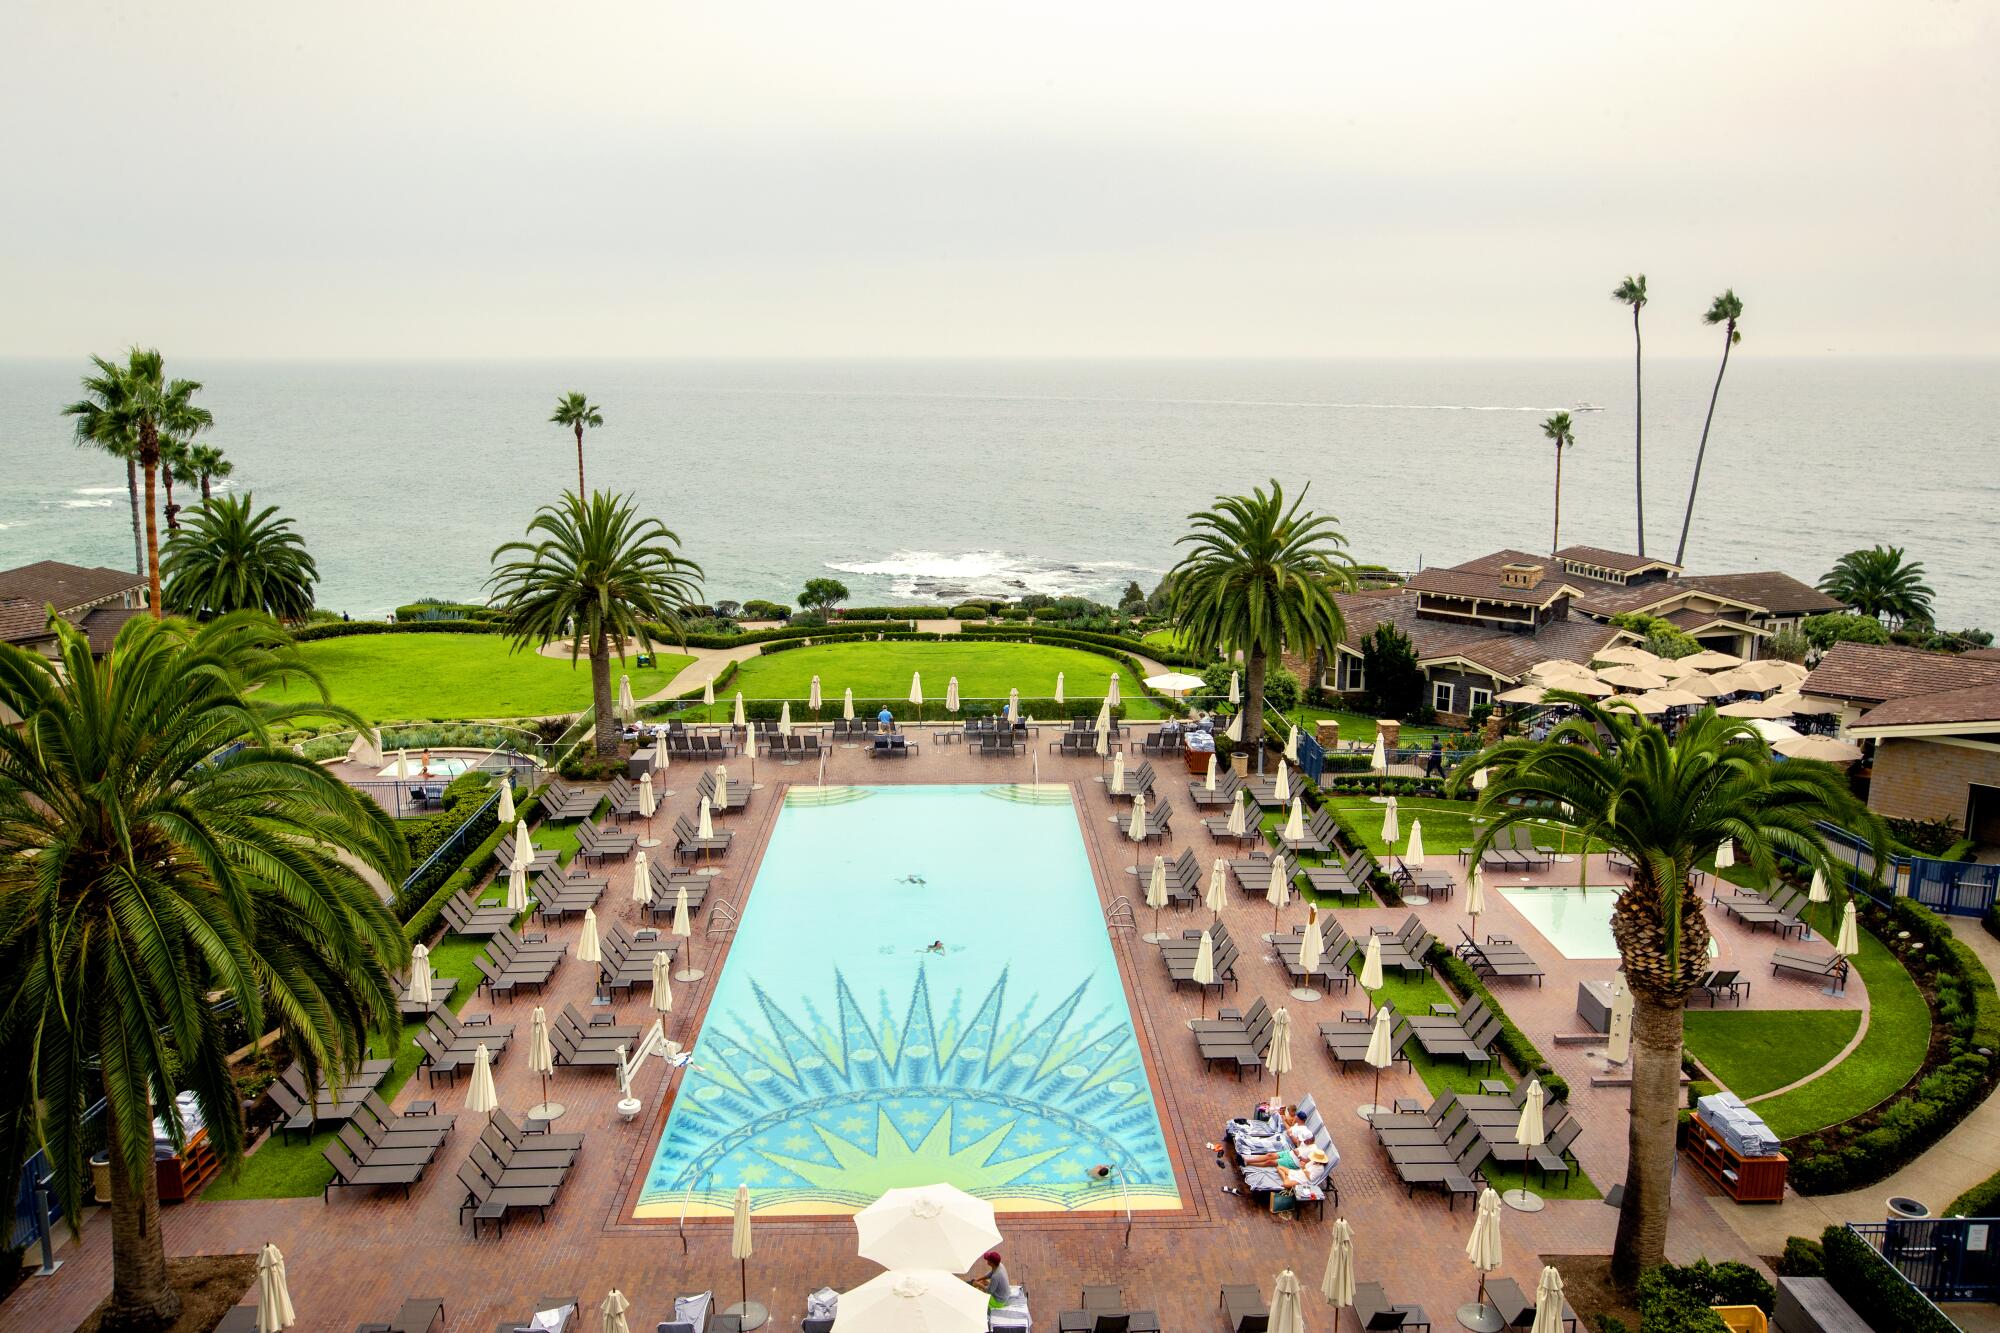 Guests swim in a pool overlooking a beach near the Pacific Ocean.